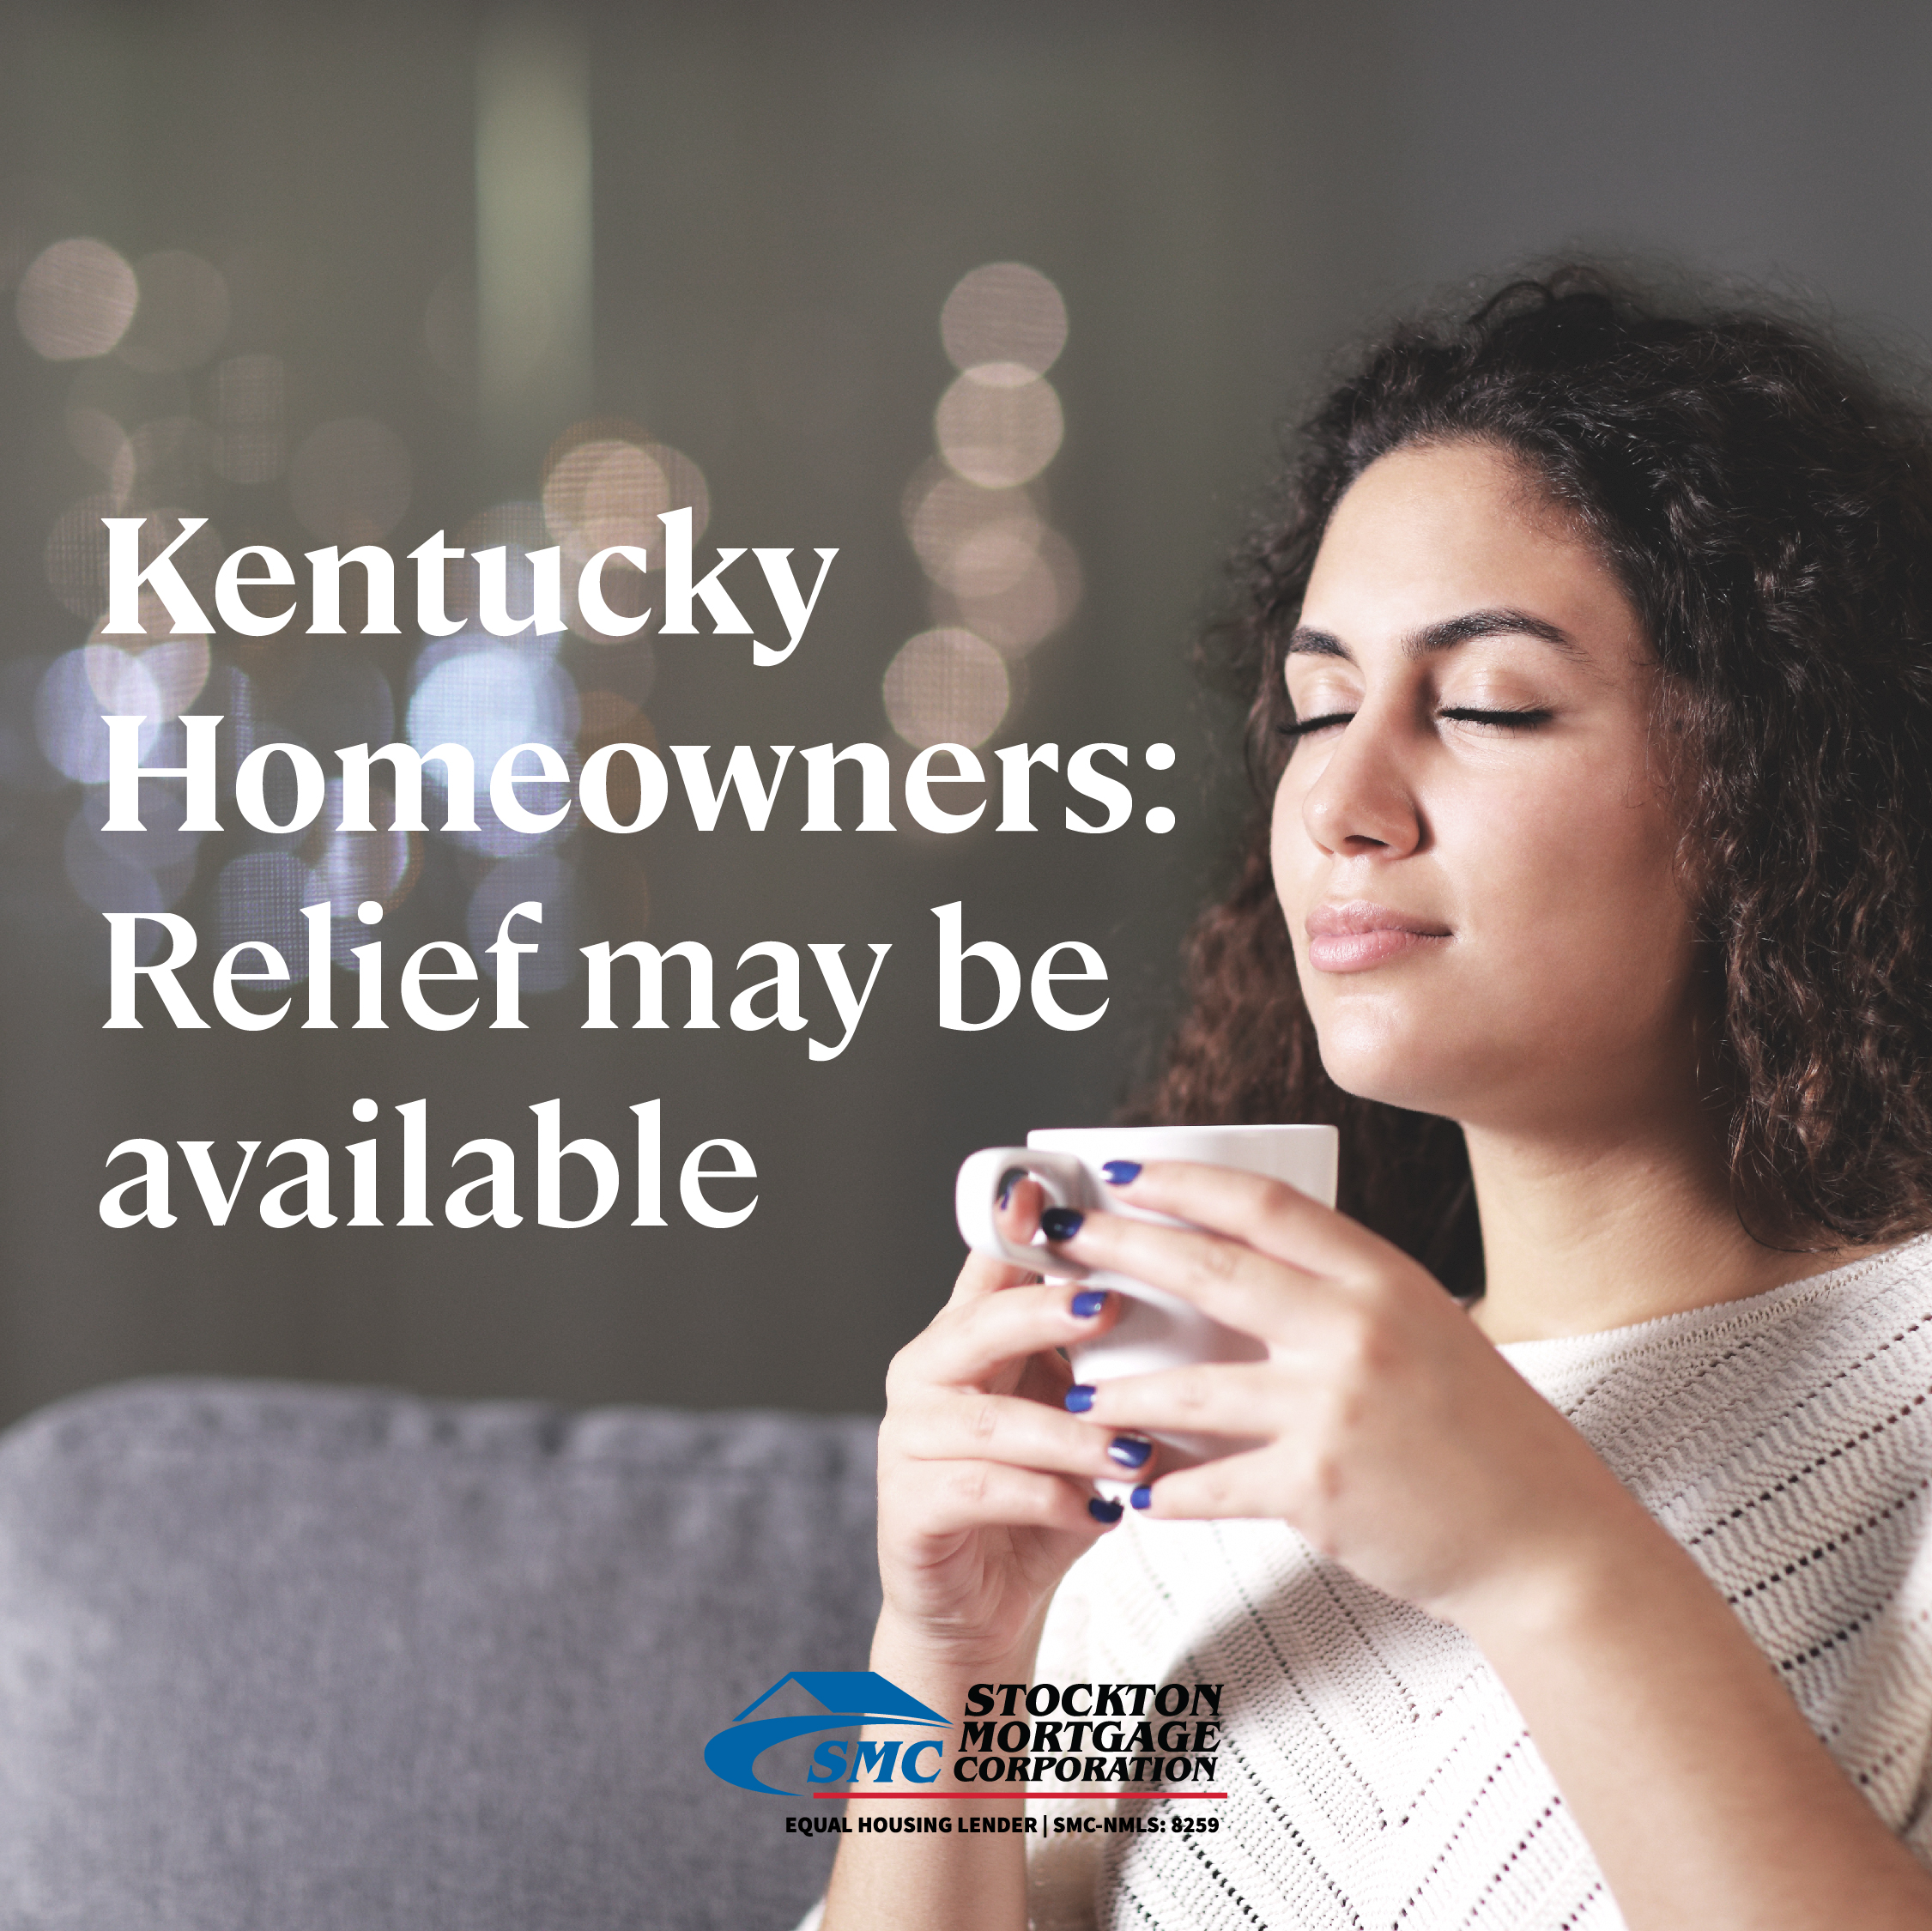 Kentucky Homeowners Relief may be available